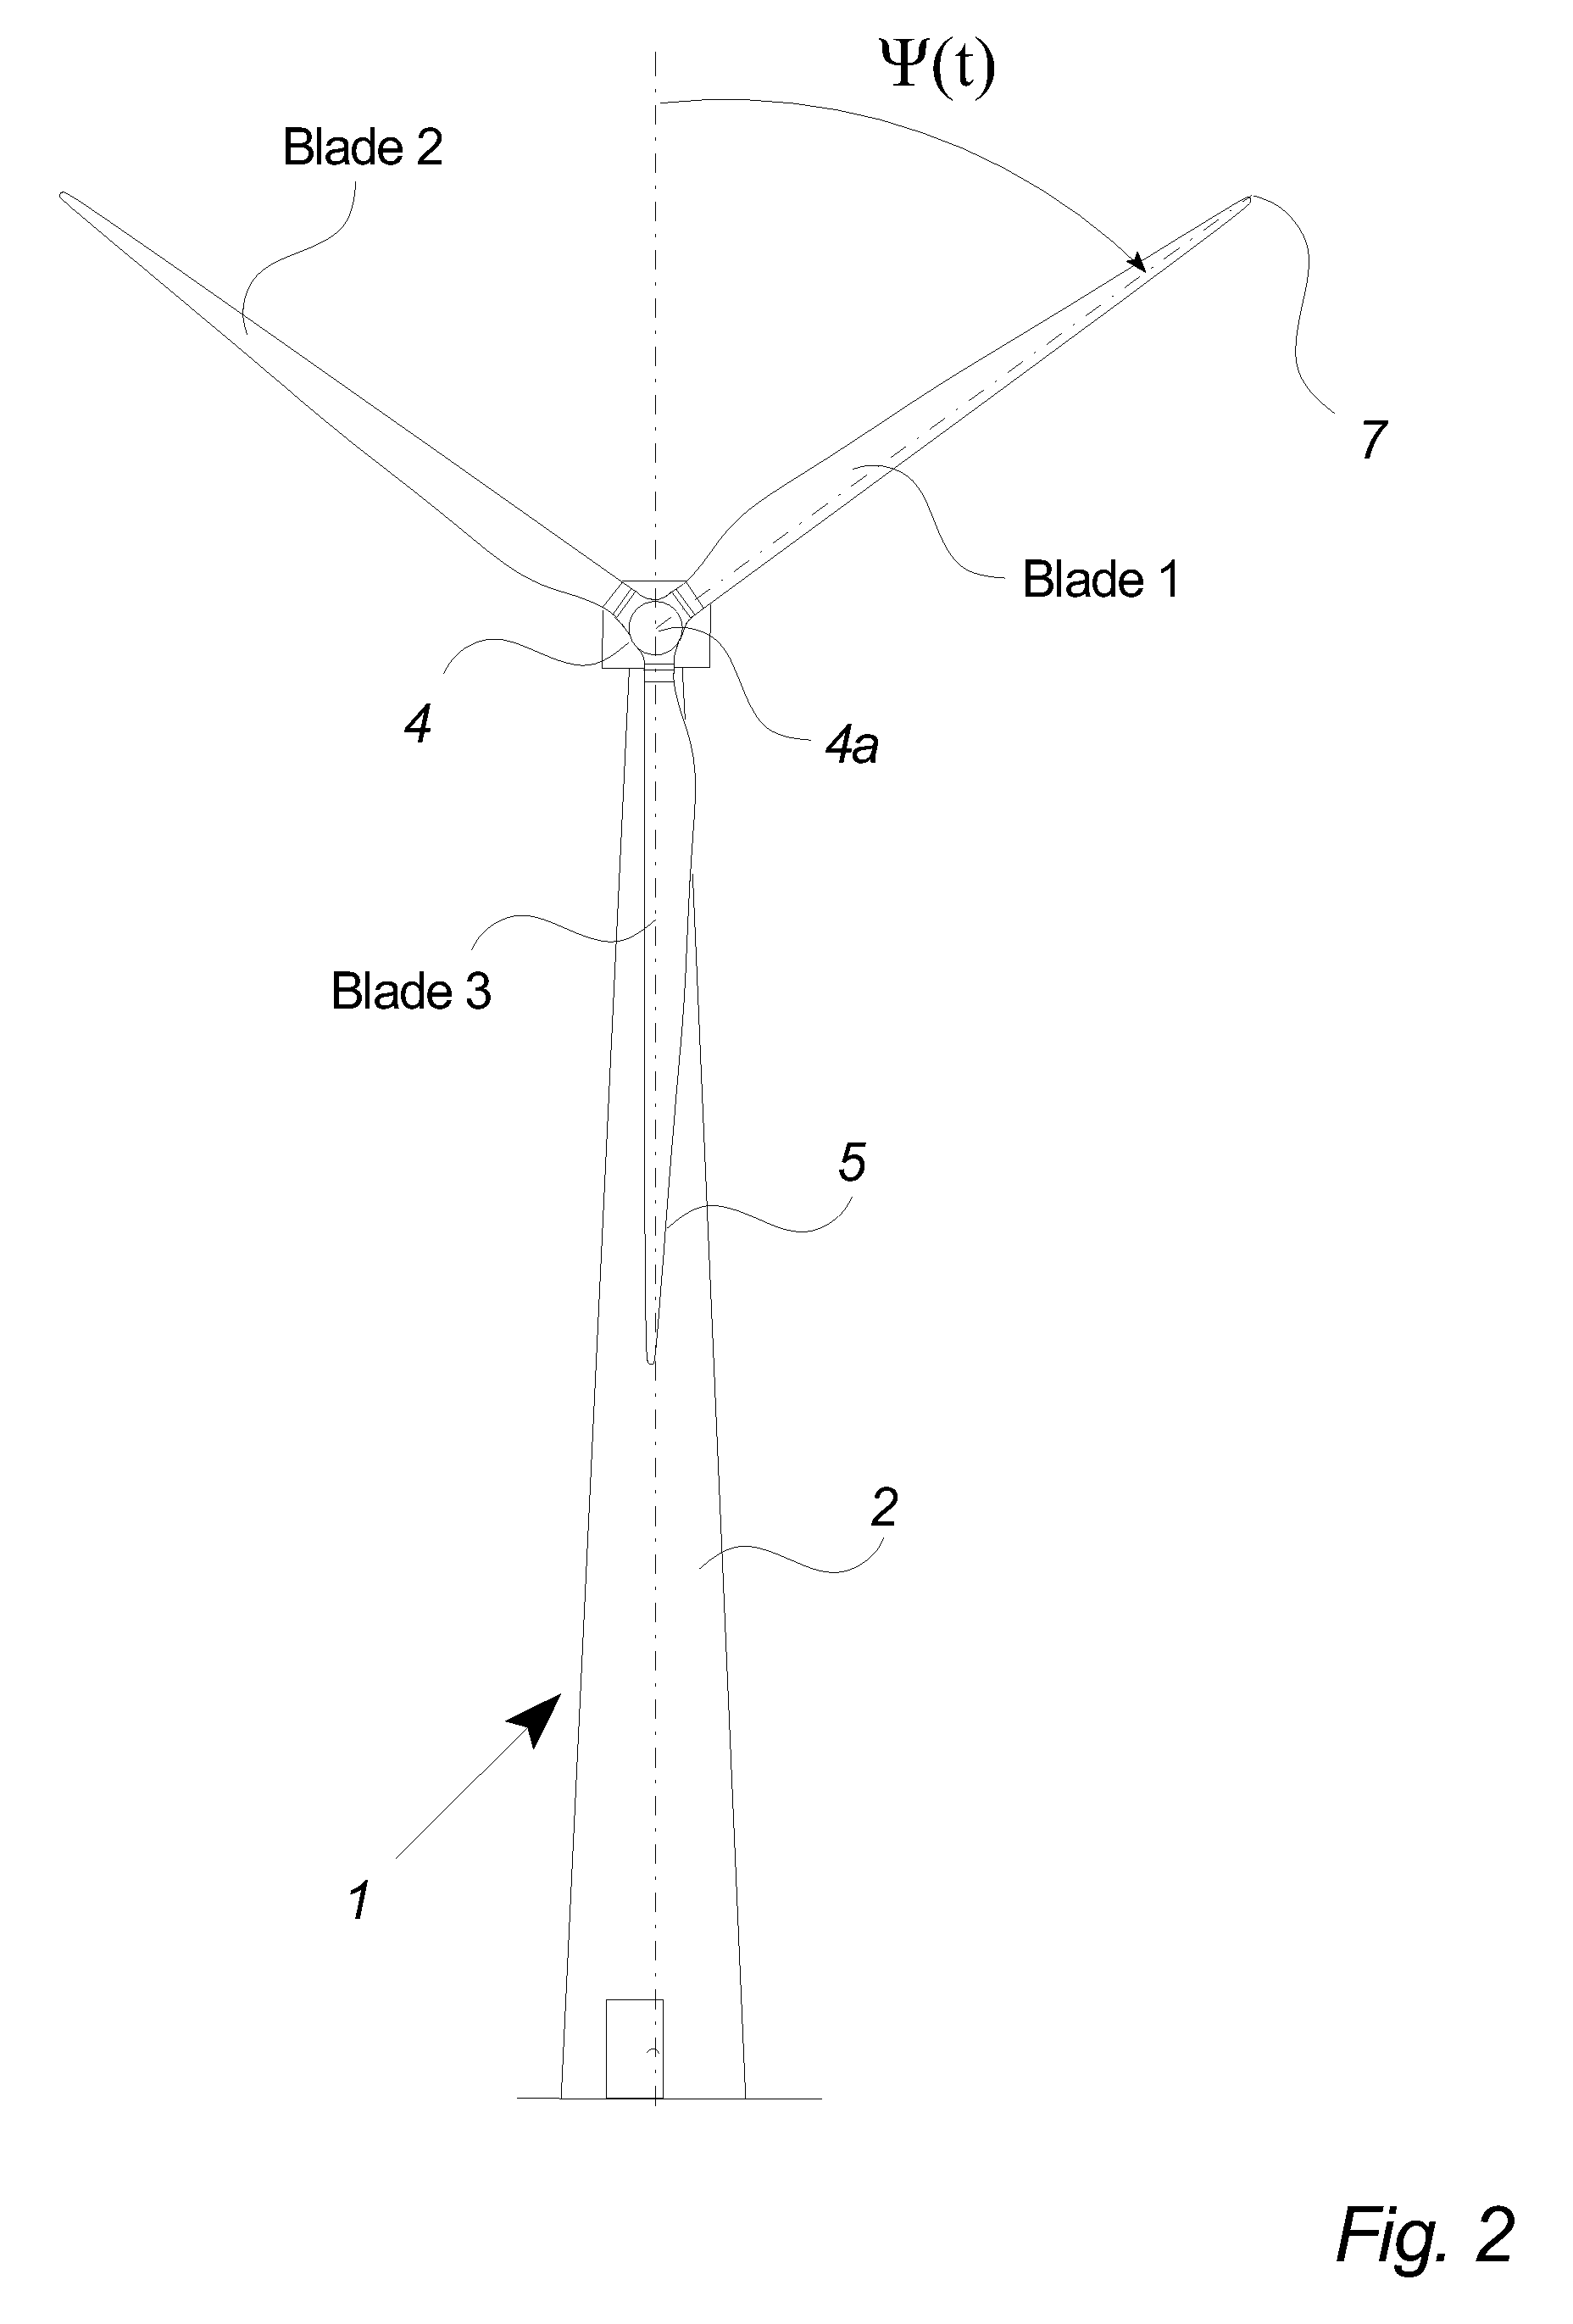 Wind turbine with pitch control arranged to reduce life shortening loads on components thereof